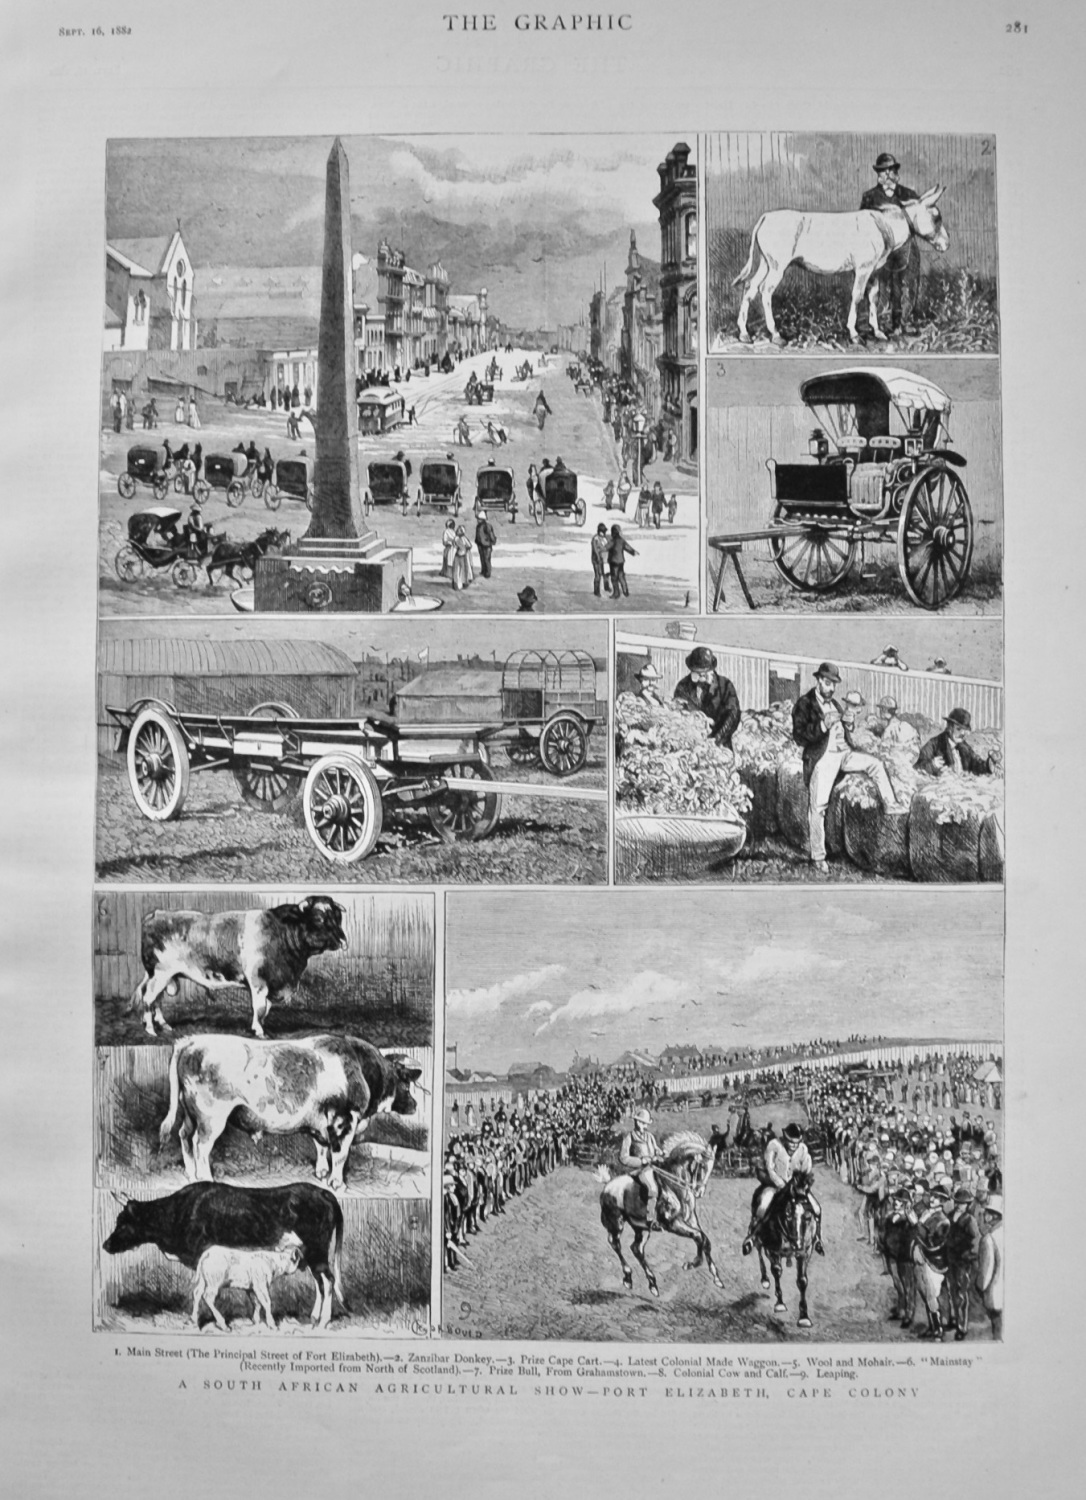 A South African Agricultural Show - Port Elizabeth, Cape Colony. 1882